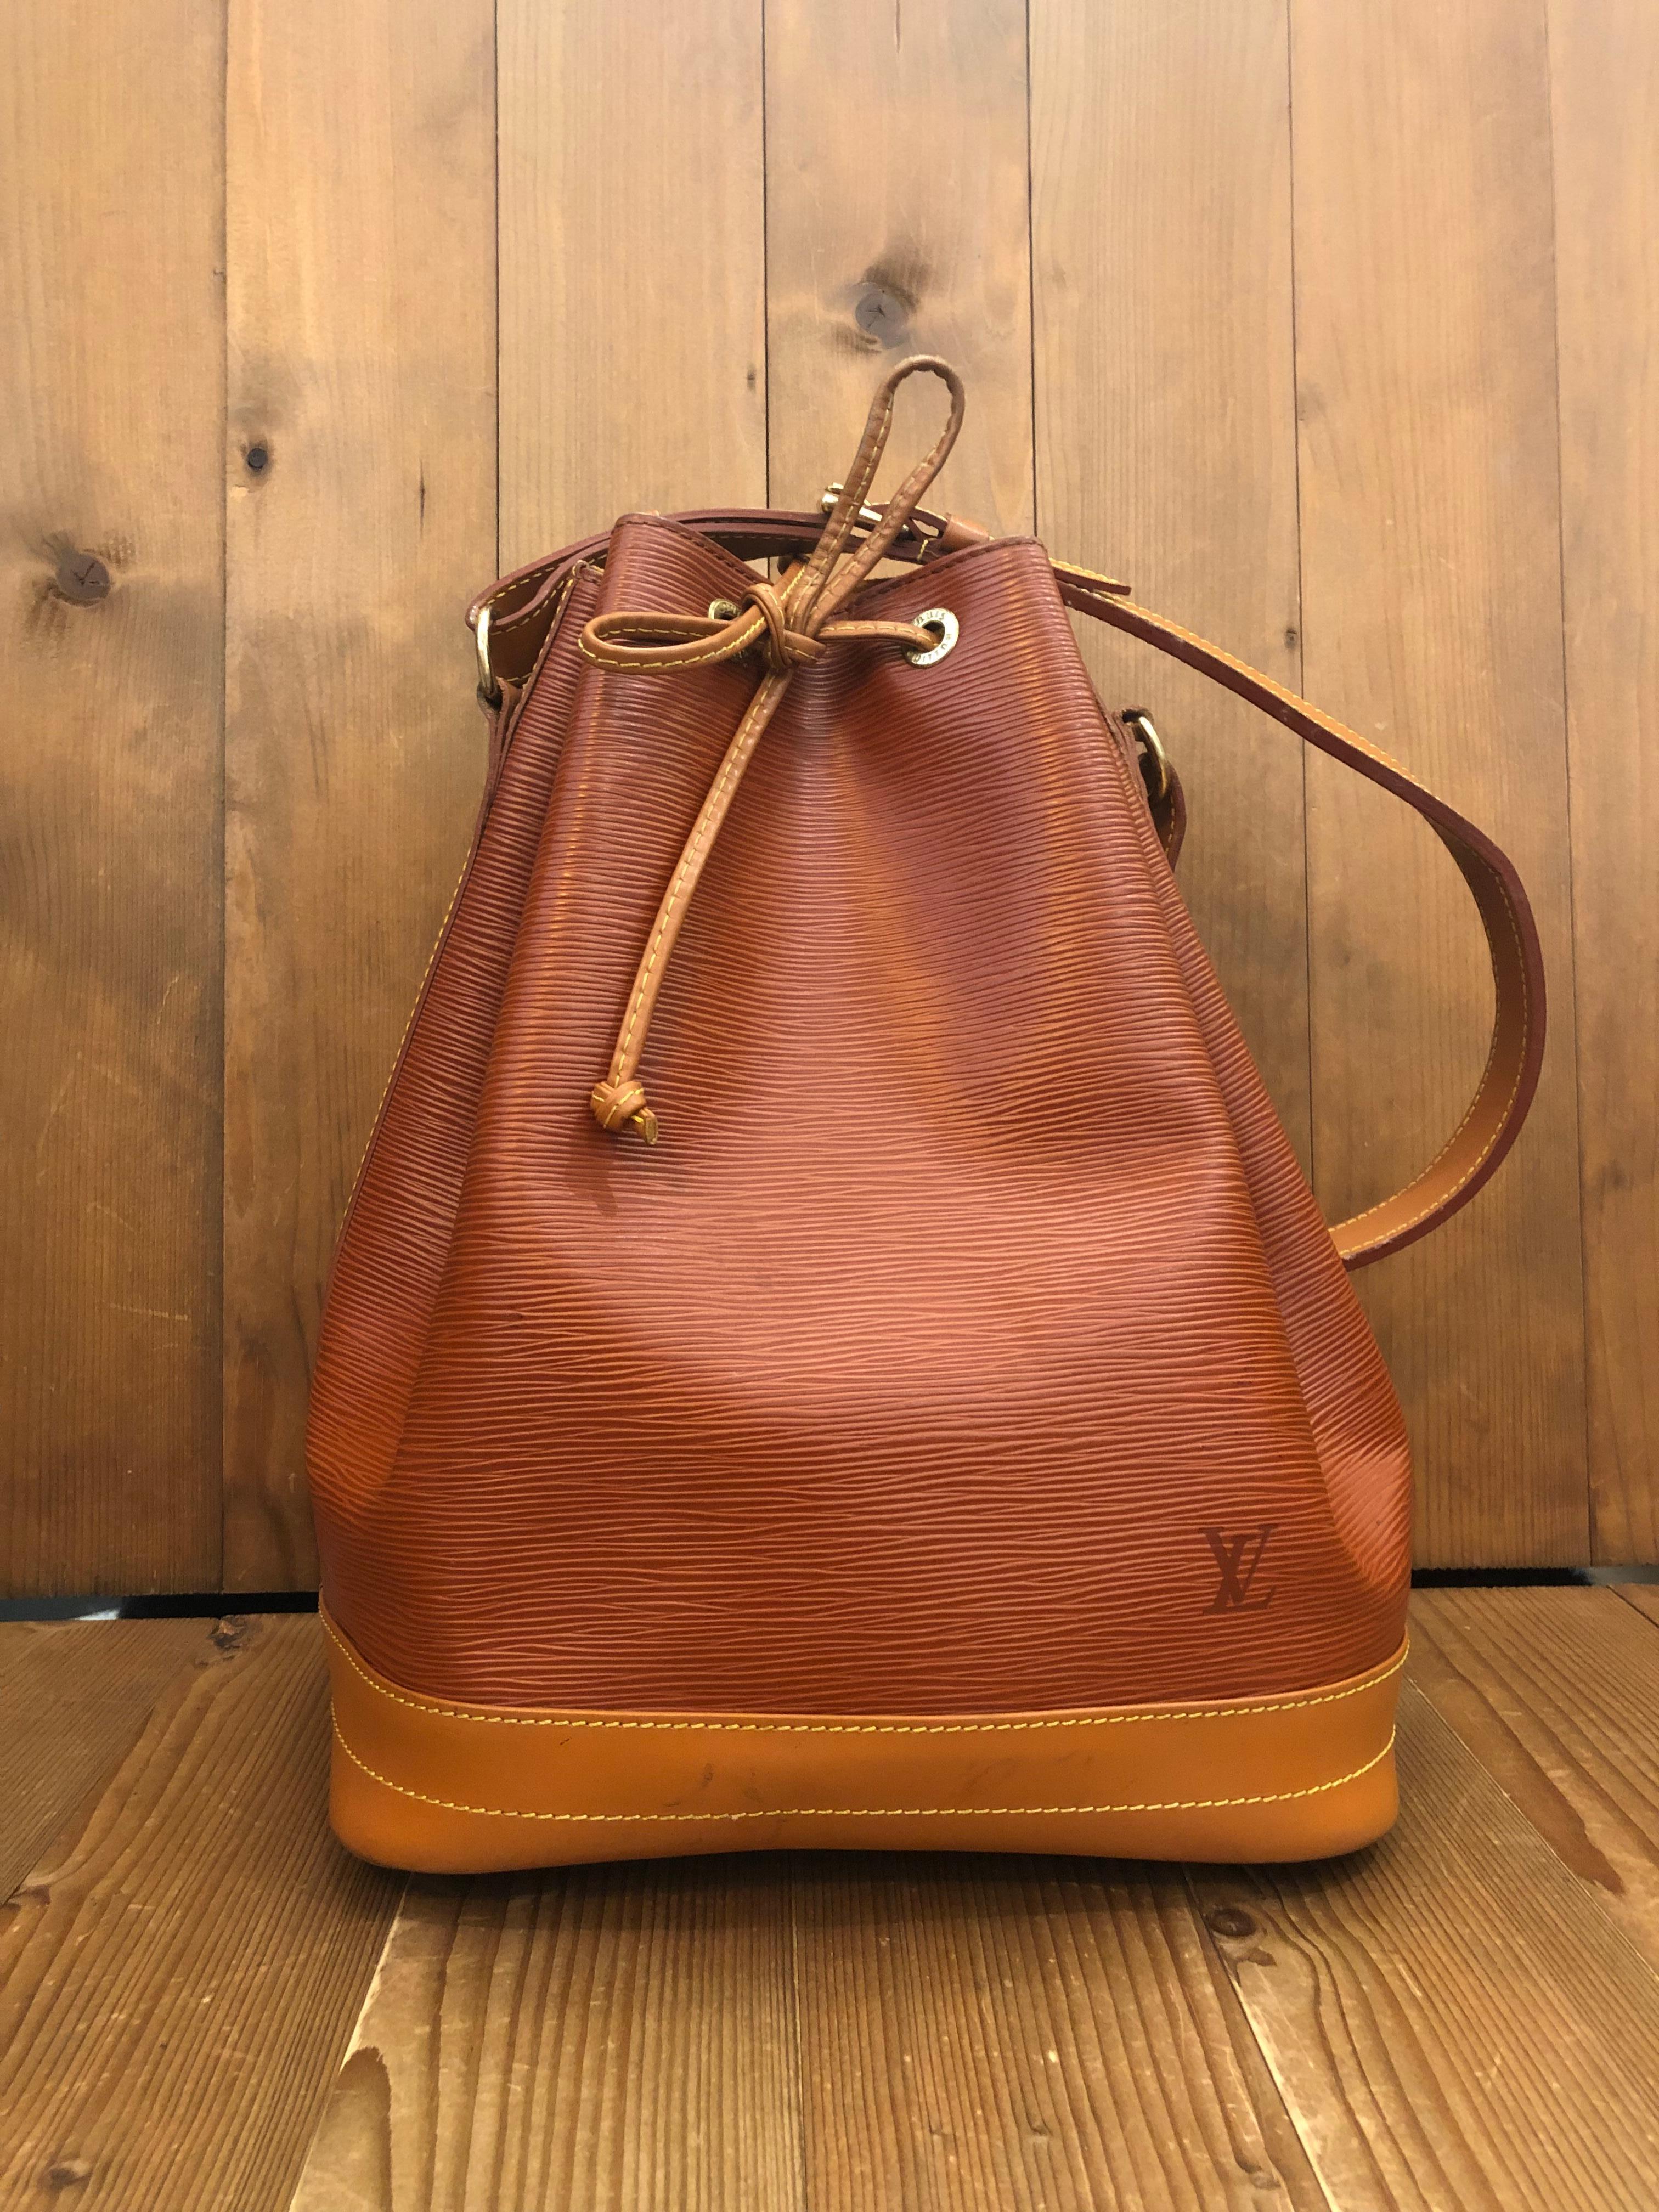 Vintage LOUIS VUITTON Noe GM shoulder bag in brown treated leather and Epi leather. This Noe is crafted of LOUIS VUITTON signature textured Epi leather in brown. It was originally created in 1932 to carry bottles of Champagne.Made in France in 1995